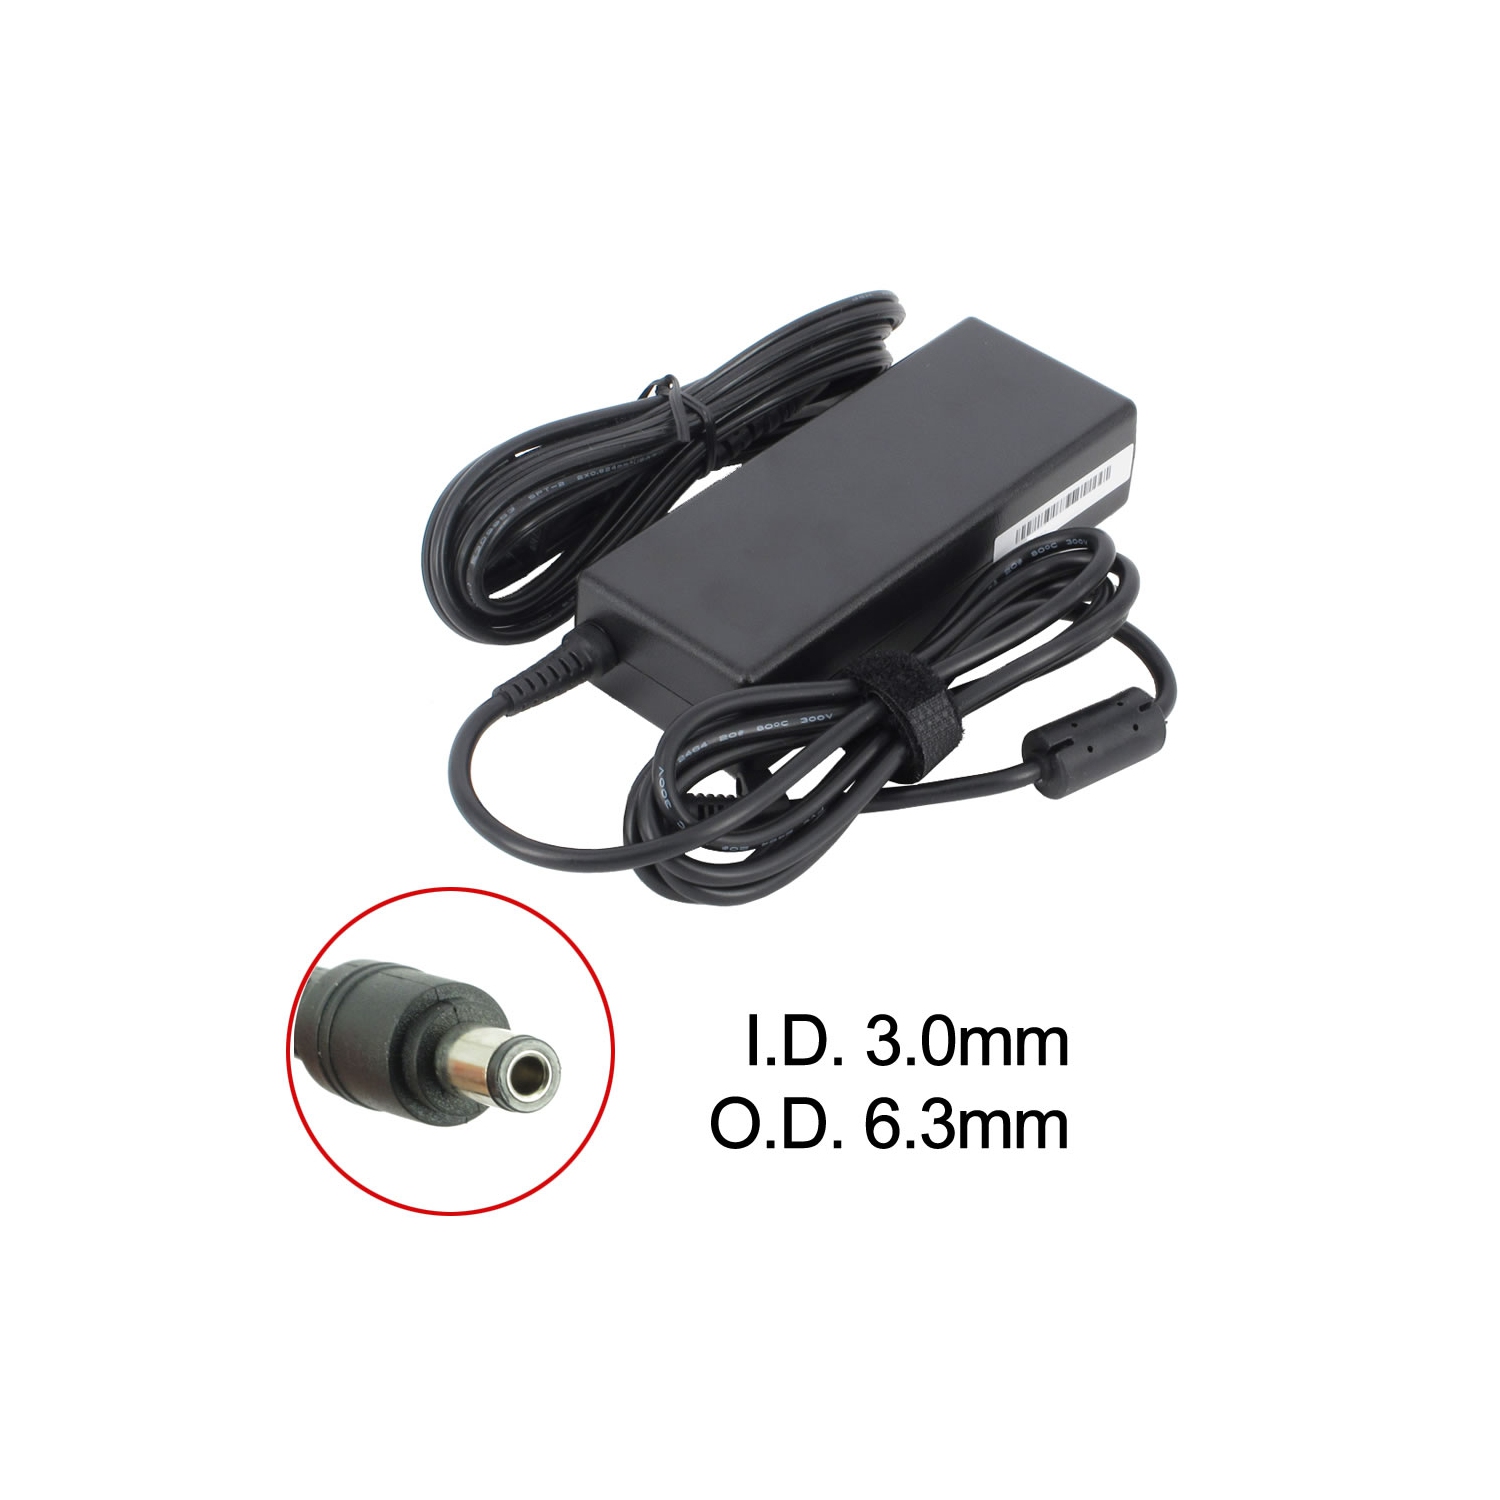 New Laptop AC Adapter for Toshiba Dynabook Satellite K17 186C/W, ADP-60RHA, PA2521C-2AC3, PA2521U-2AC3, PA3201U-1ACA